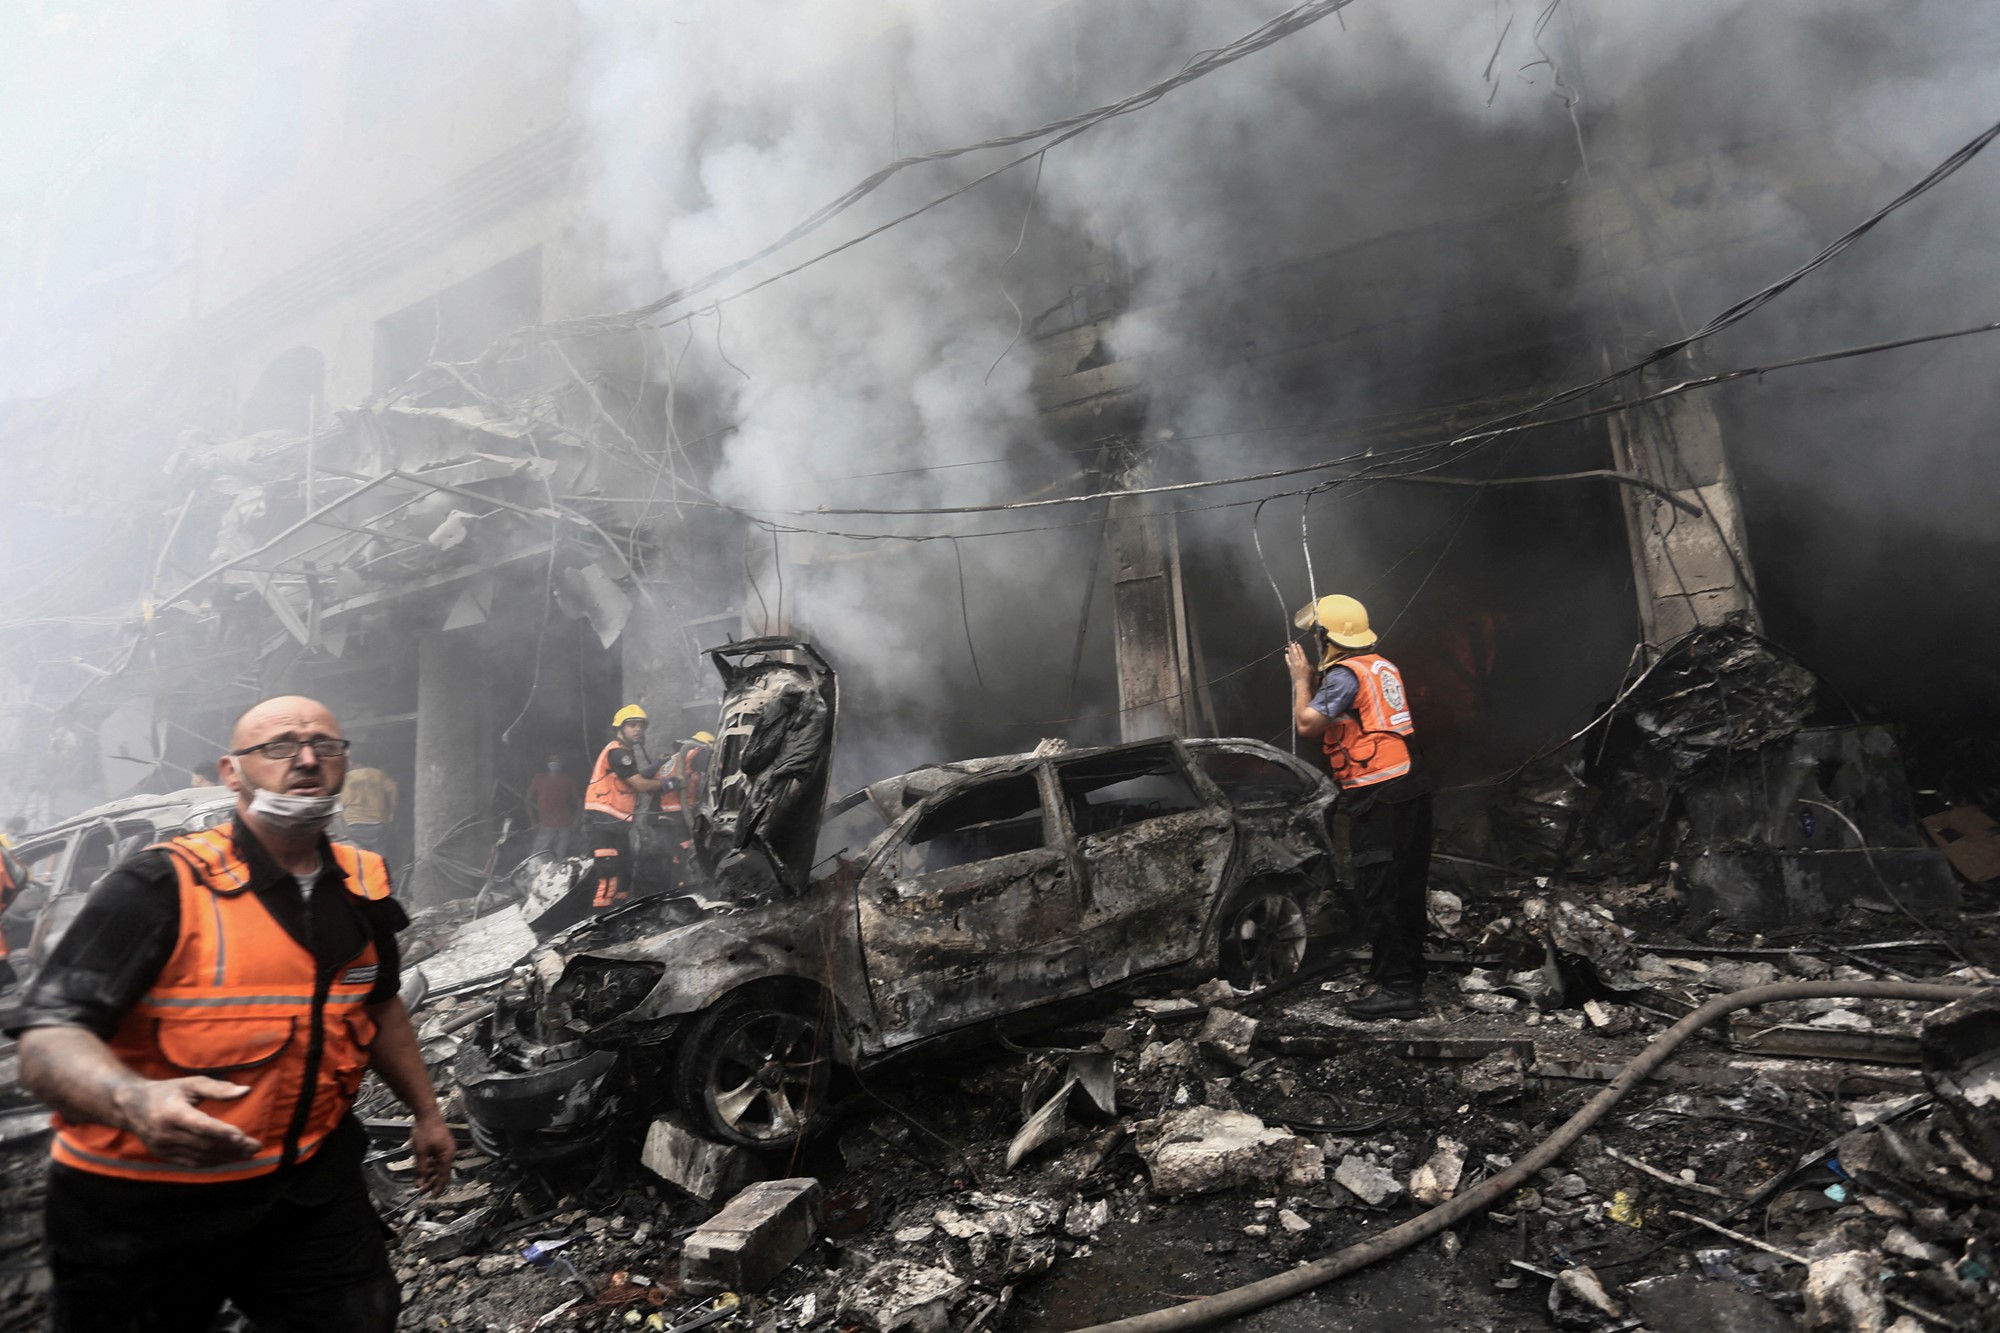 People in high vis vests walk around the remains of a burnt out car and building